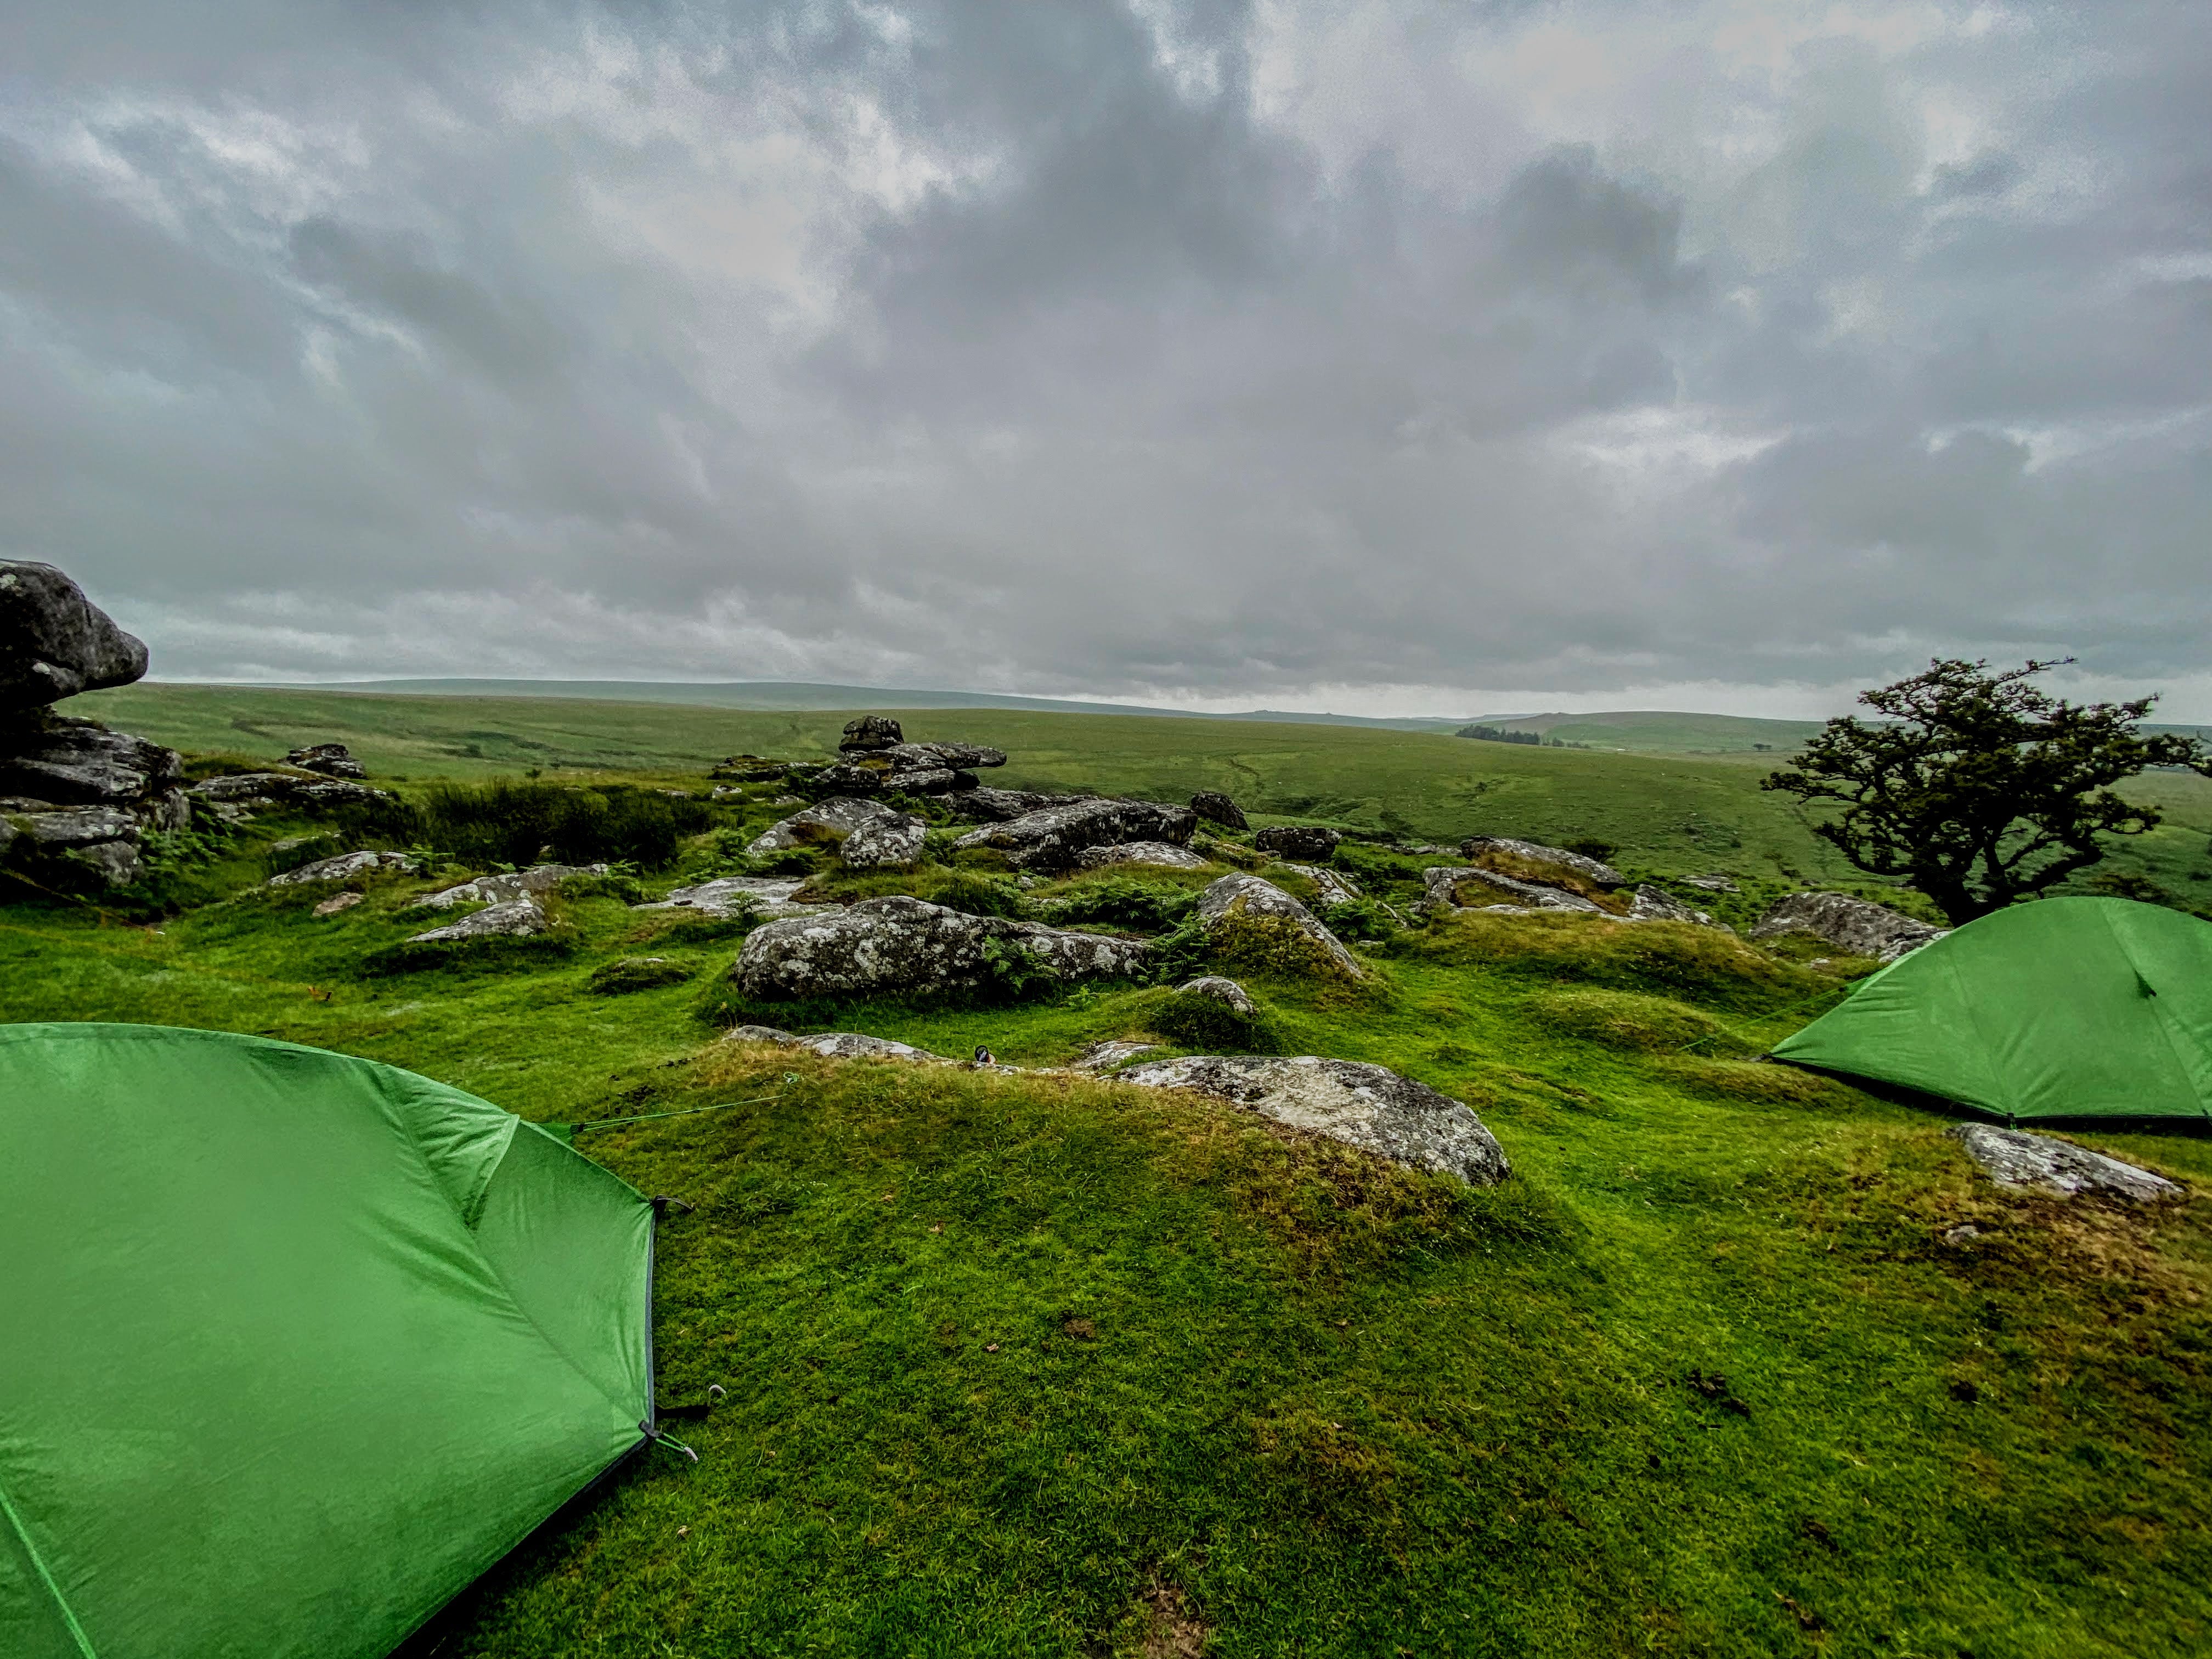 Camping on Dartmoor as clouds gather